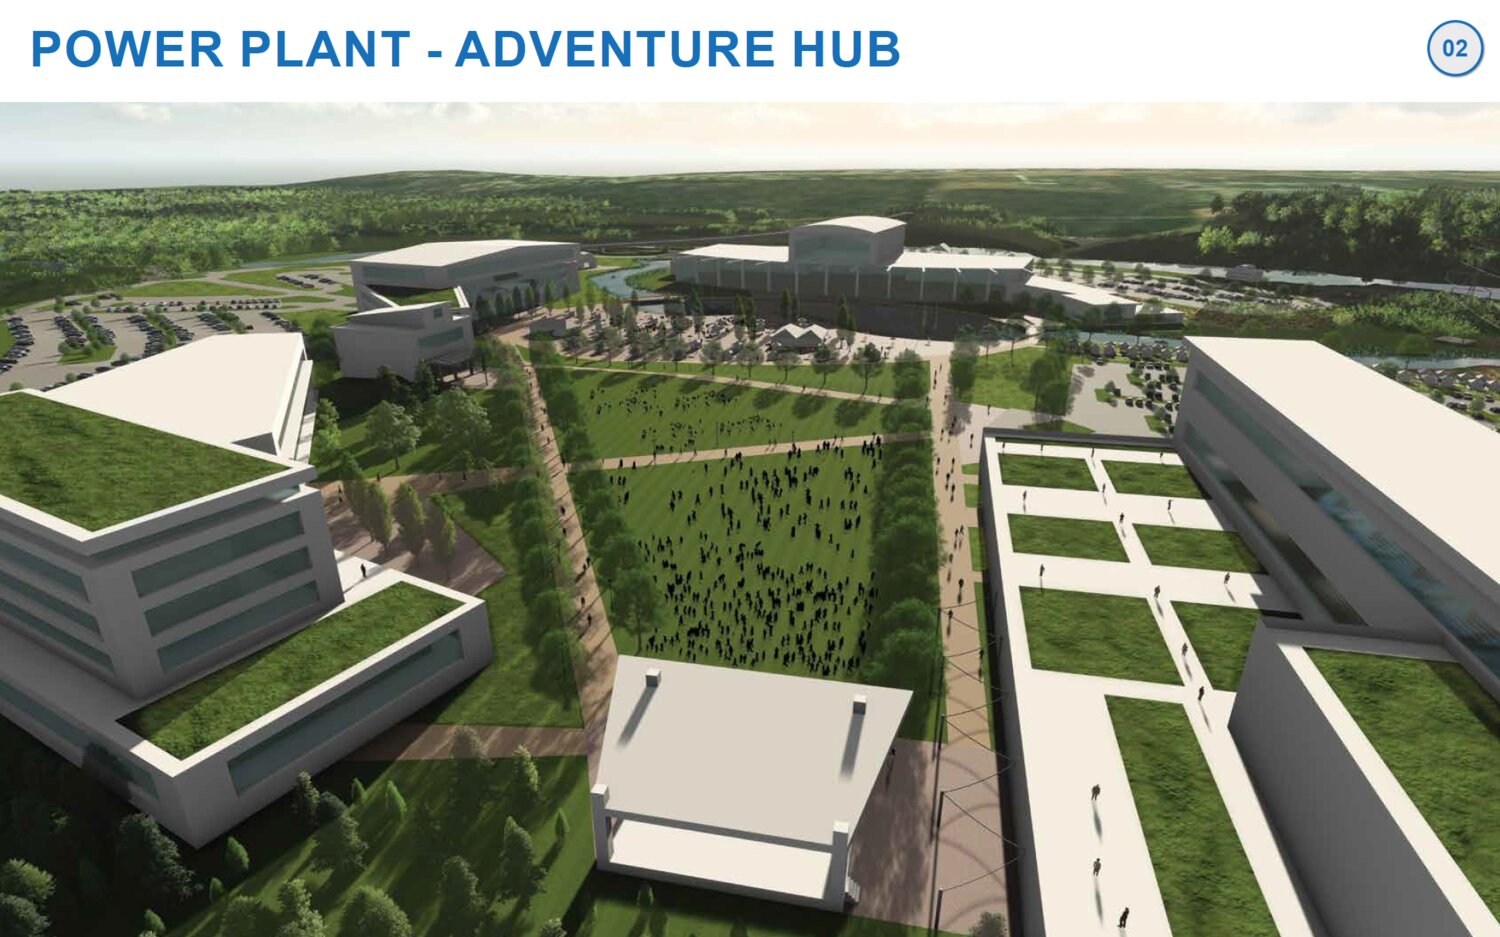 Option 2 for the power plant area is an adventure hub with a conference center, ropes course, zipline, camping and an outdoor music venue.